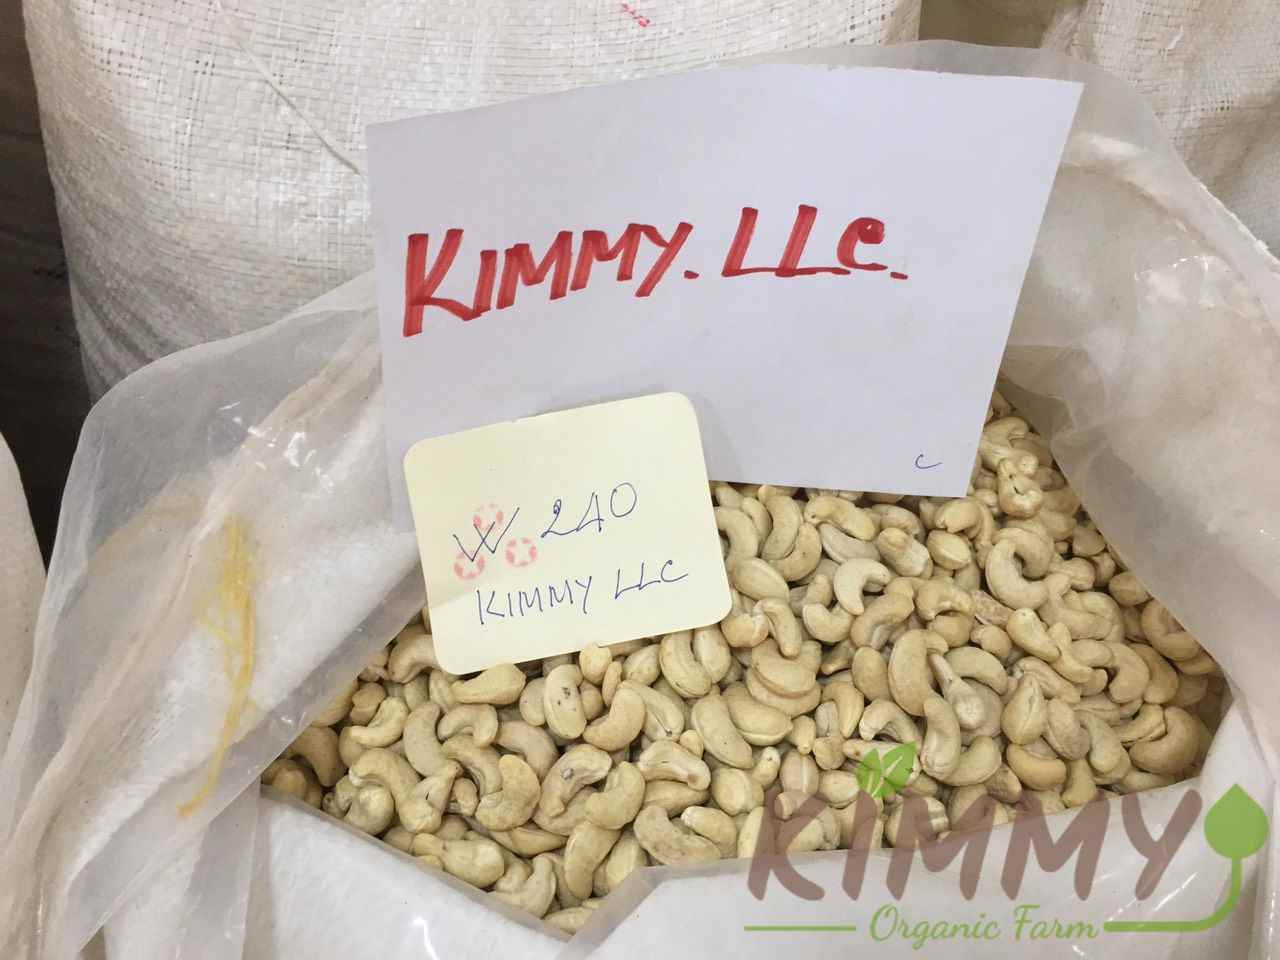 Vietnam’s W320 & W240 are the most popular cashew kernels, their export volumes increase year by year.